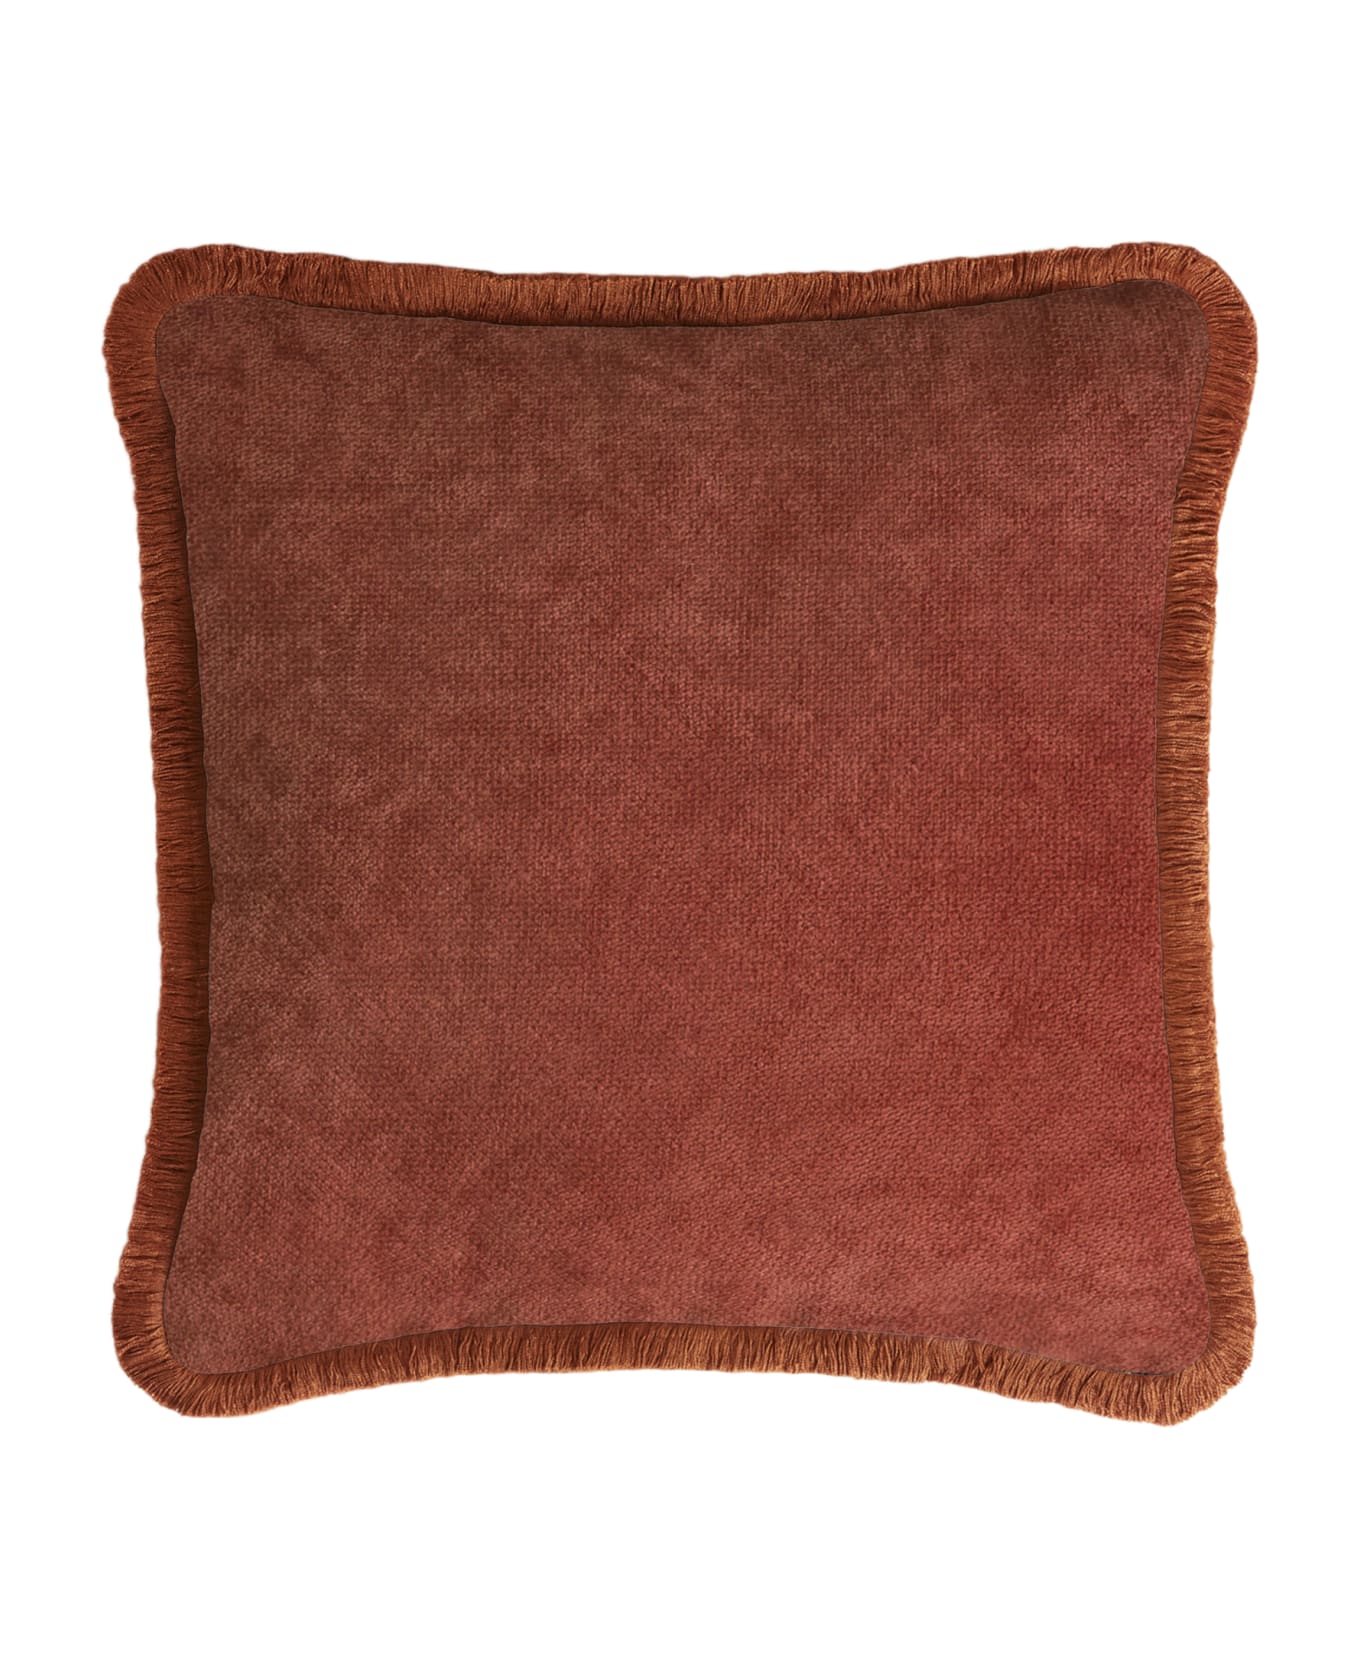 Lo Decor Happy Pillow   Brick Red With Brick Red Fringes - brick red, brick red